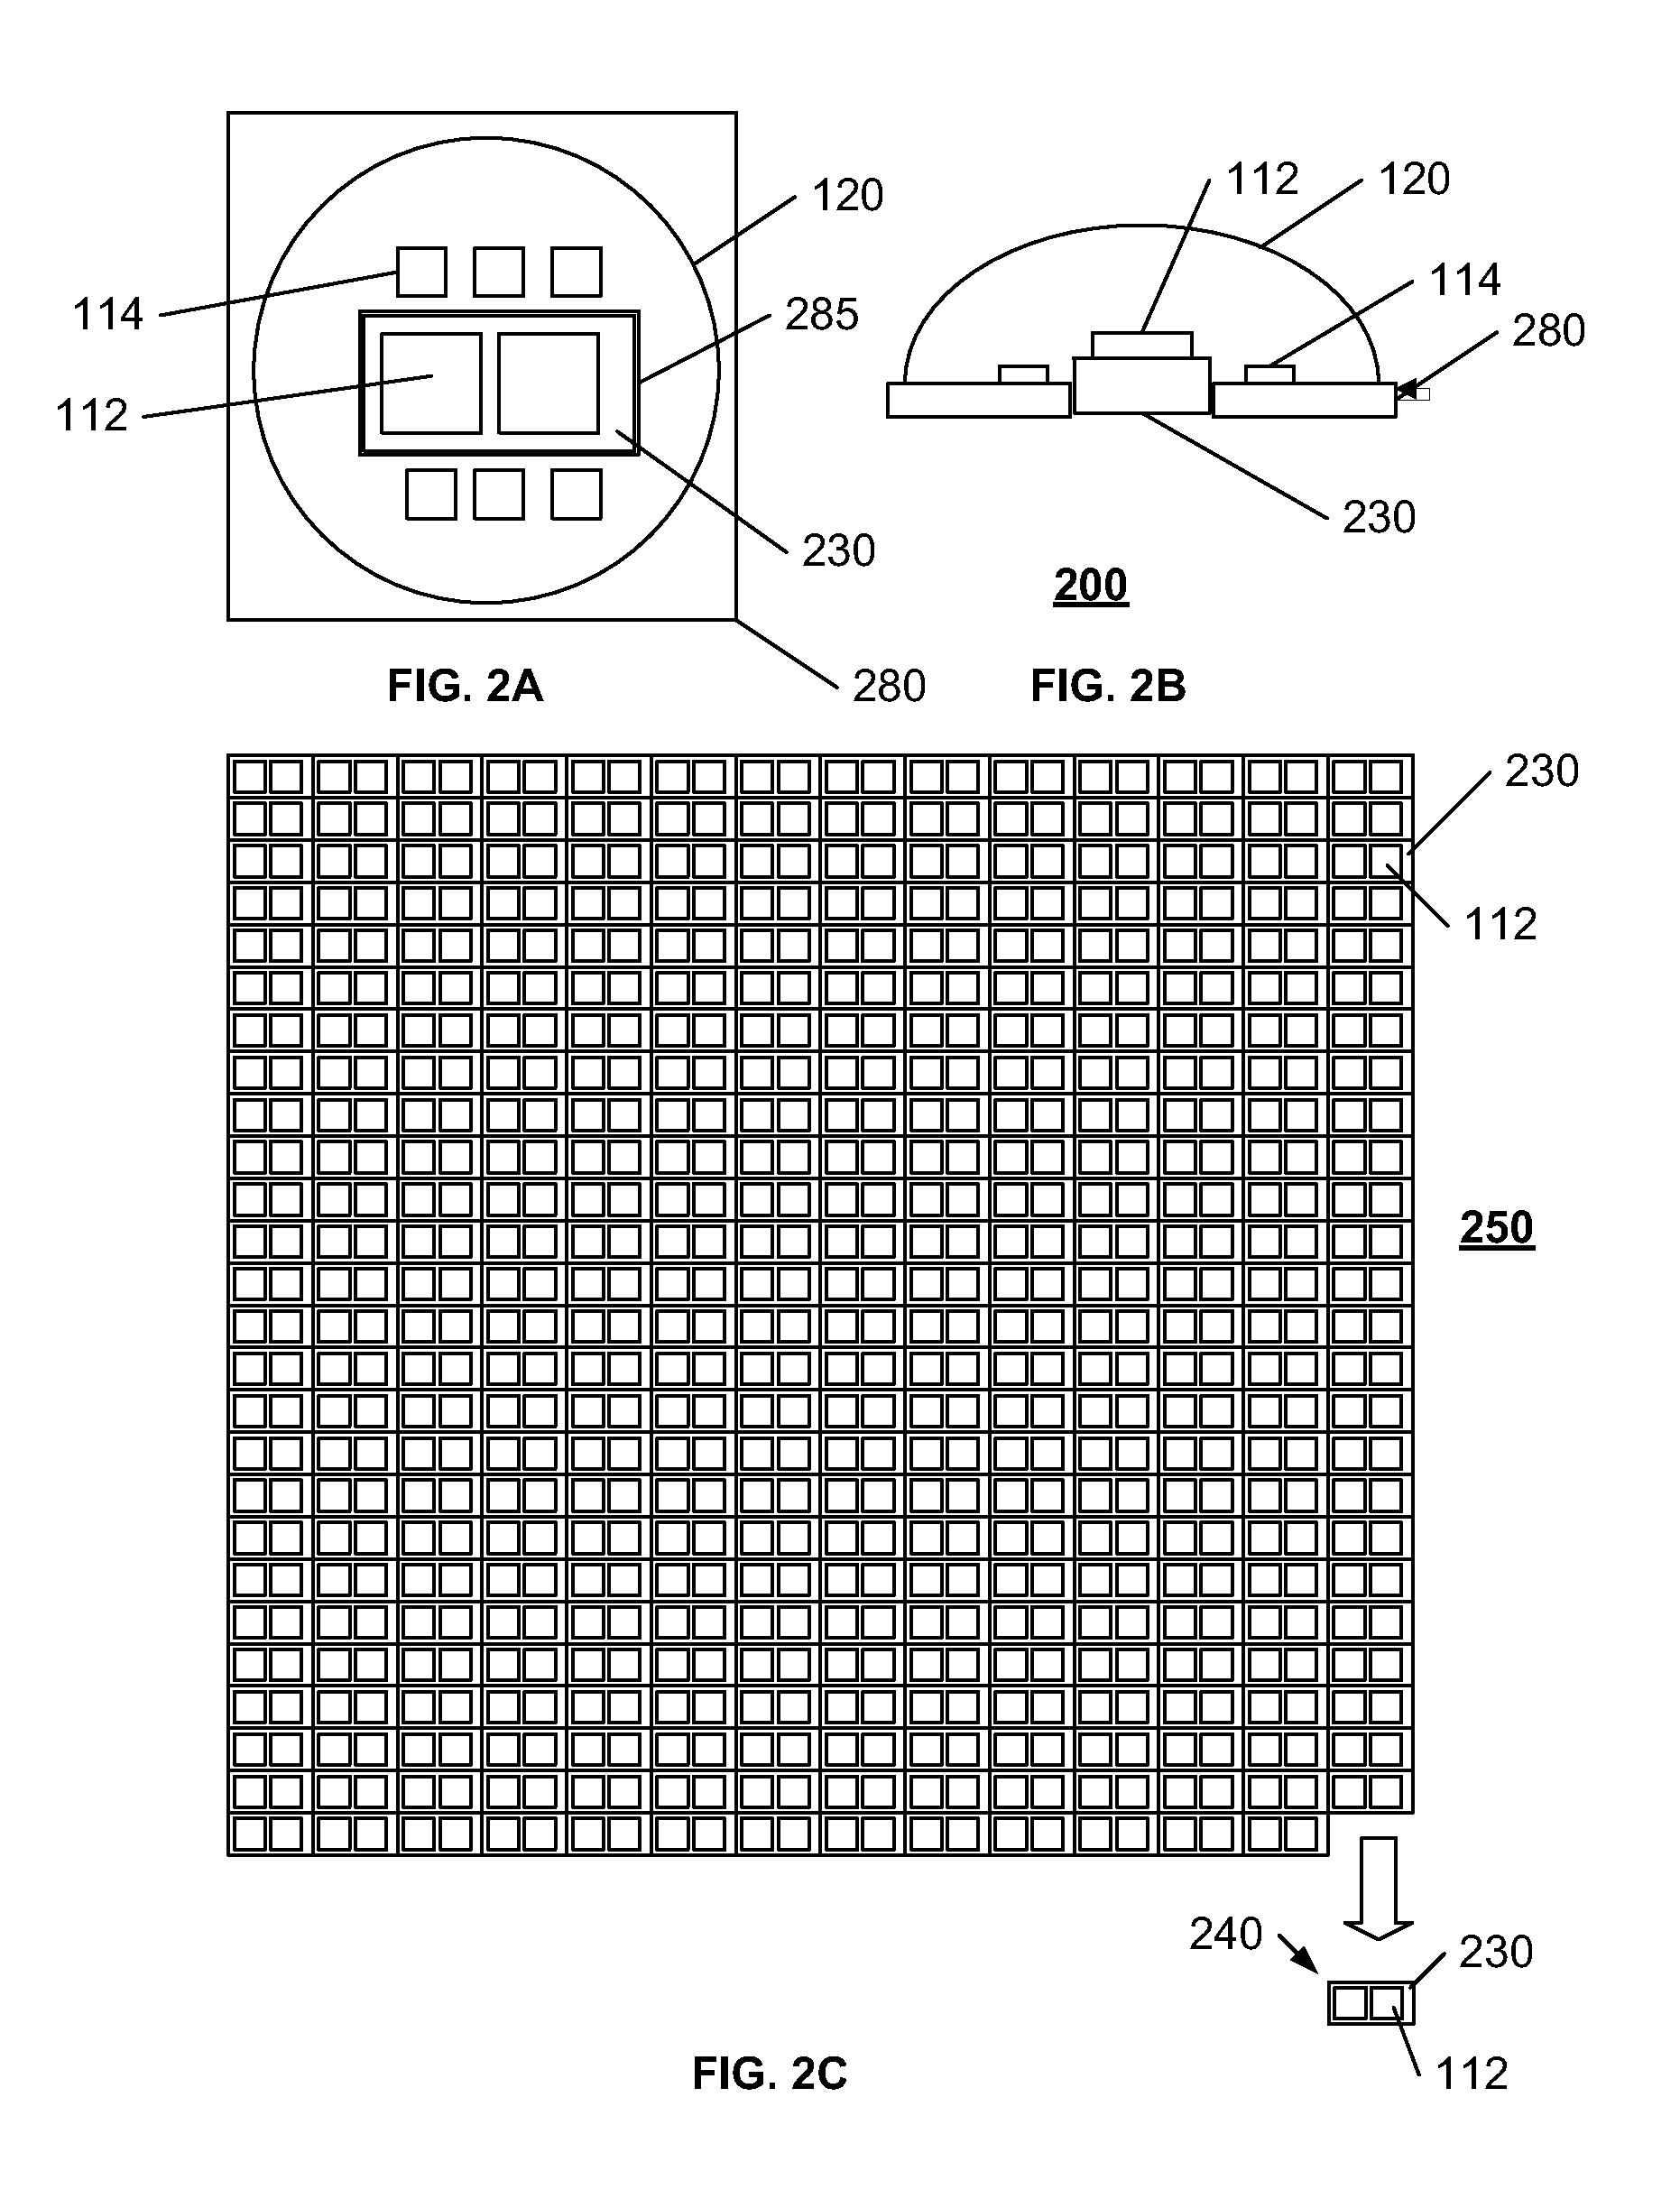 Hybrid combination of substrate and carrier mounted light emitting devices